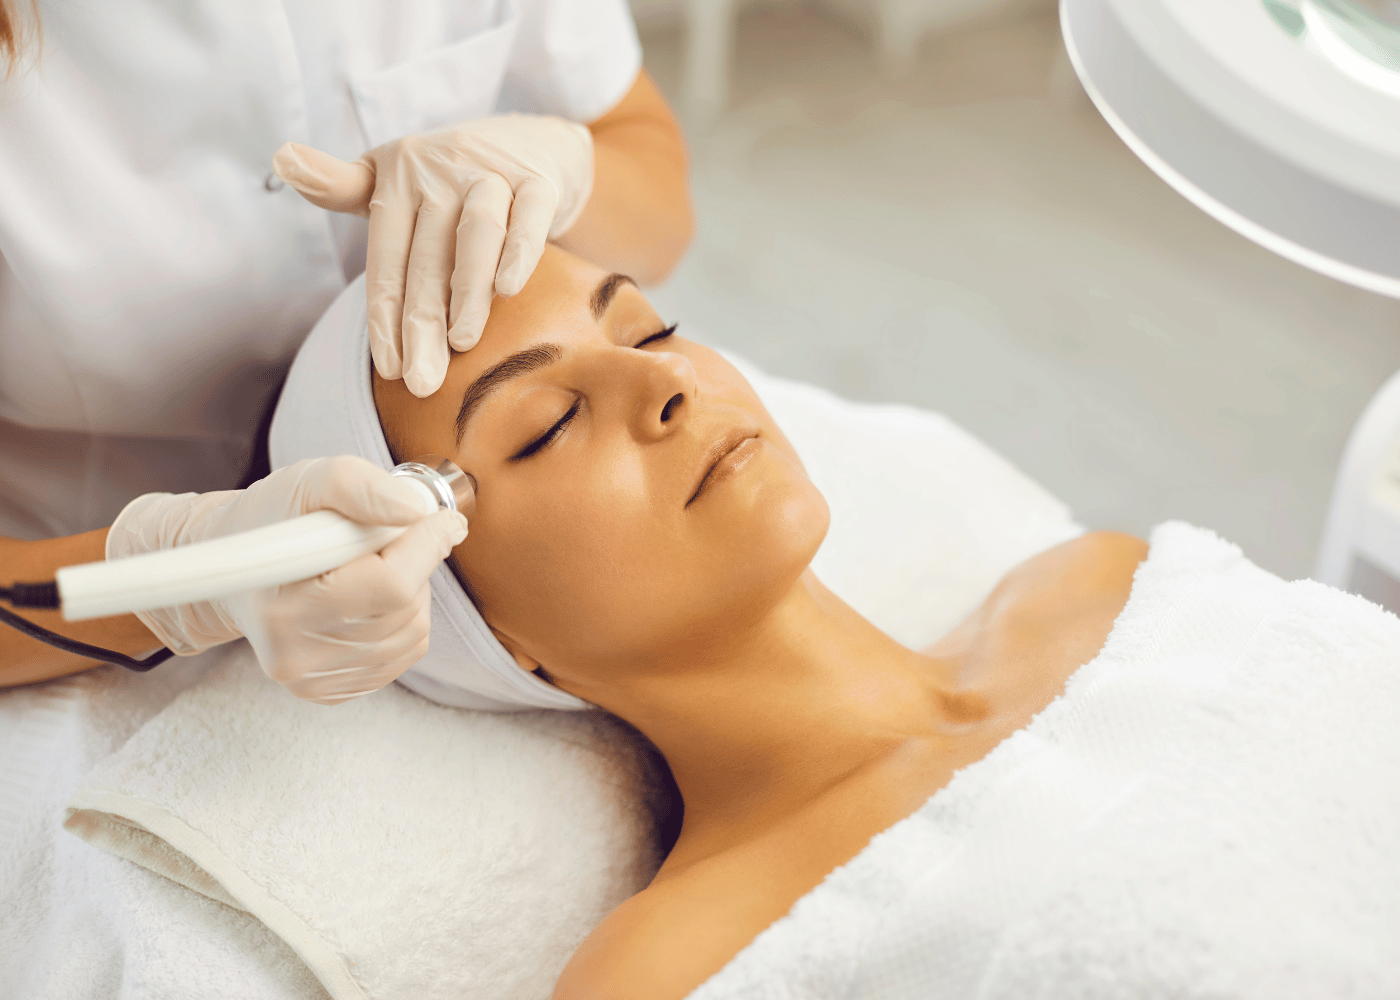 lady wearing a hair band and robe having laser treatment on face